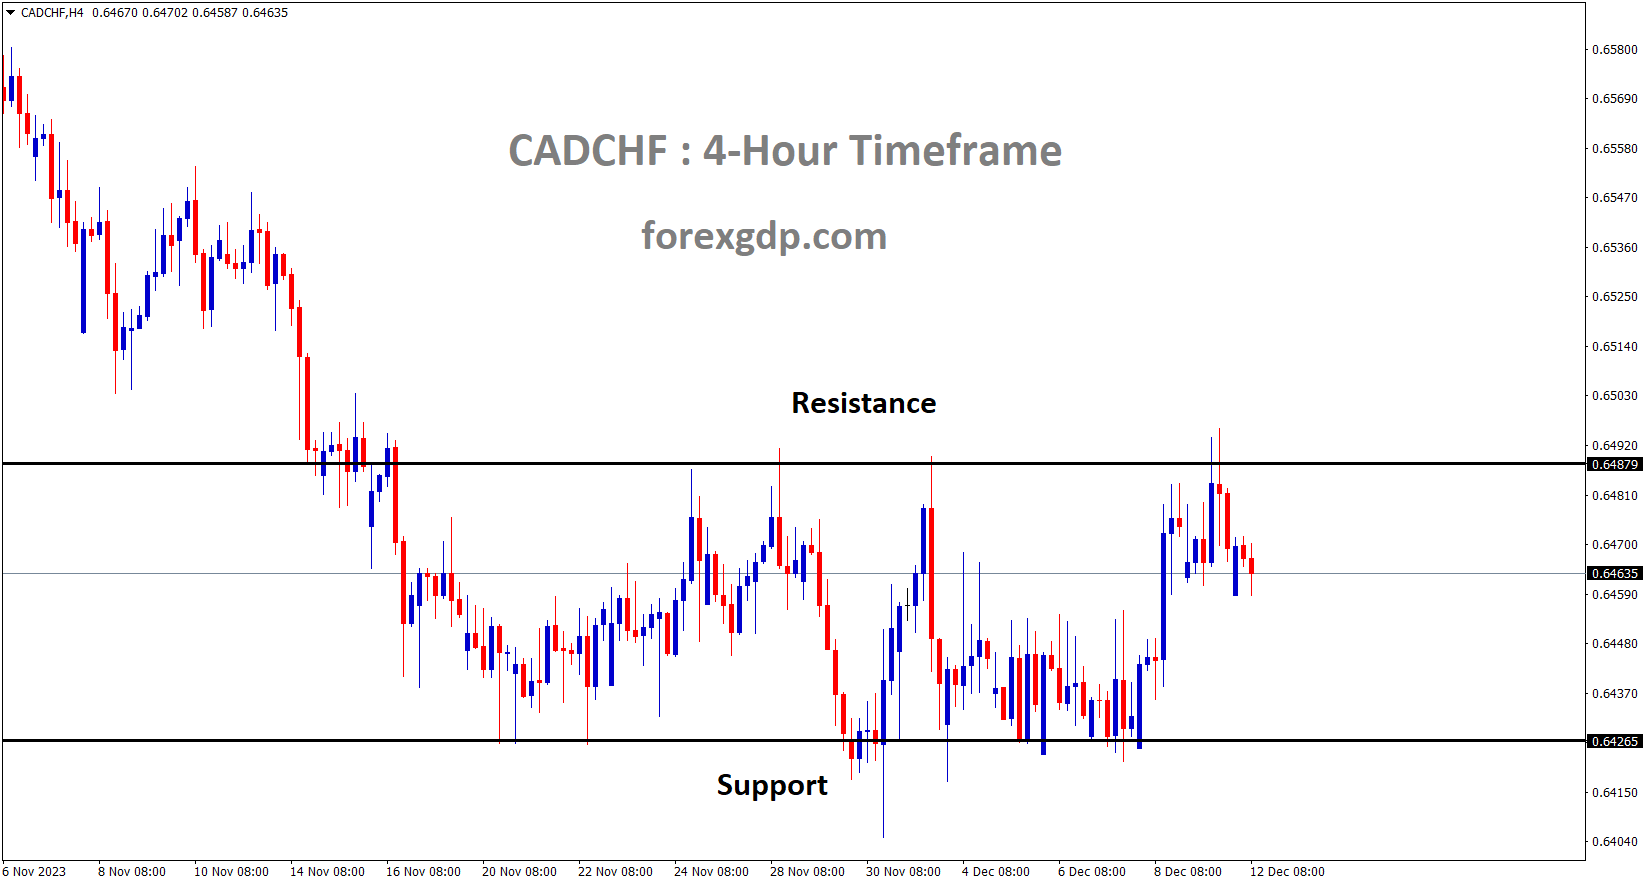 CADCHF is moving in box pattern and the market has fallen from the resistance area